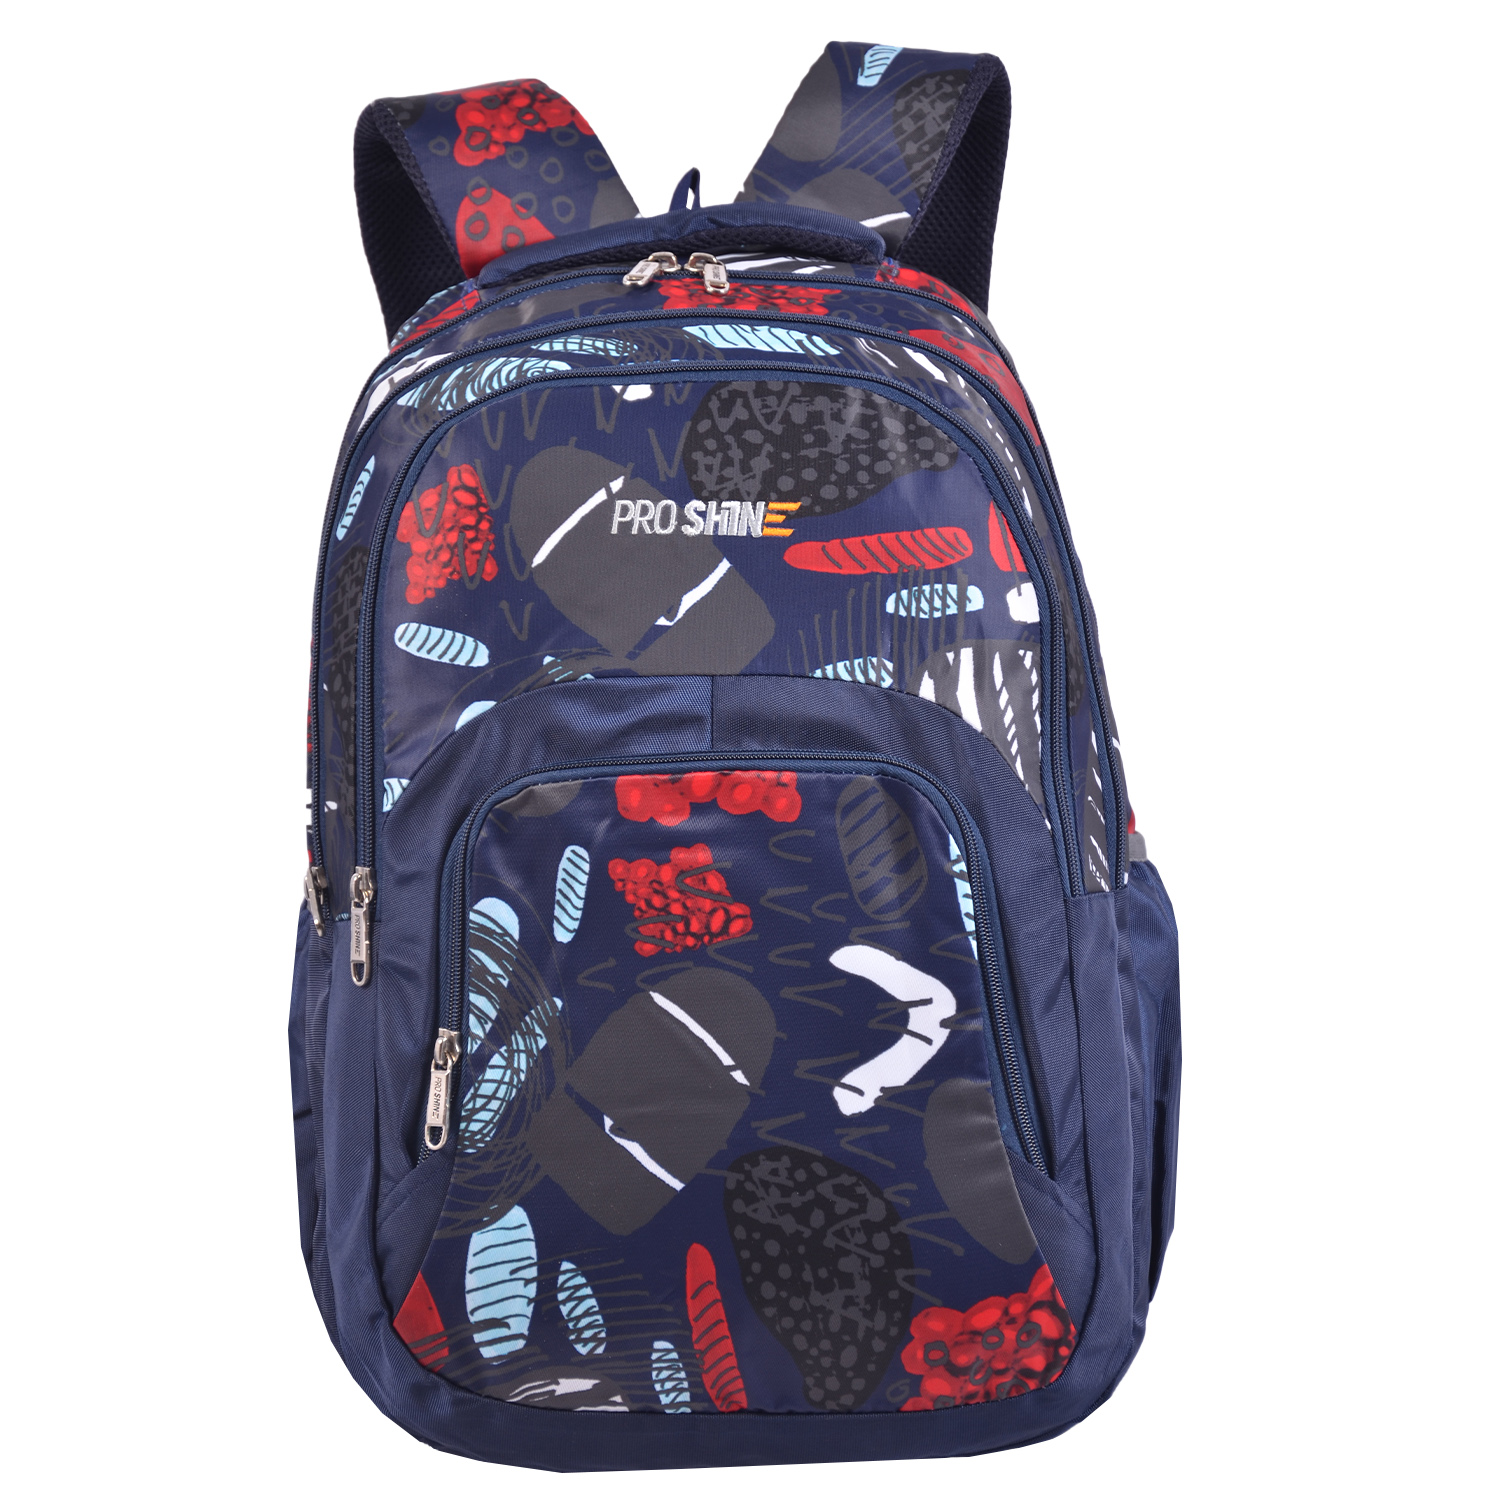 RoshanBags_PROSHINE 38L CASUAL BACKPACK A0398 NAVY BLUE